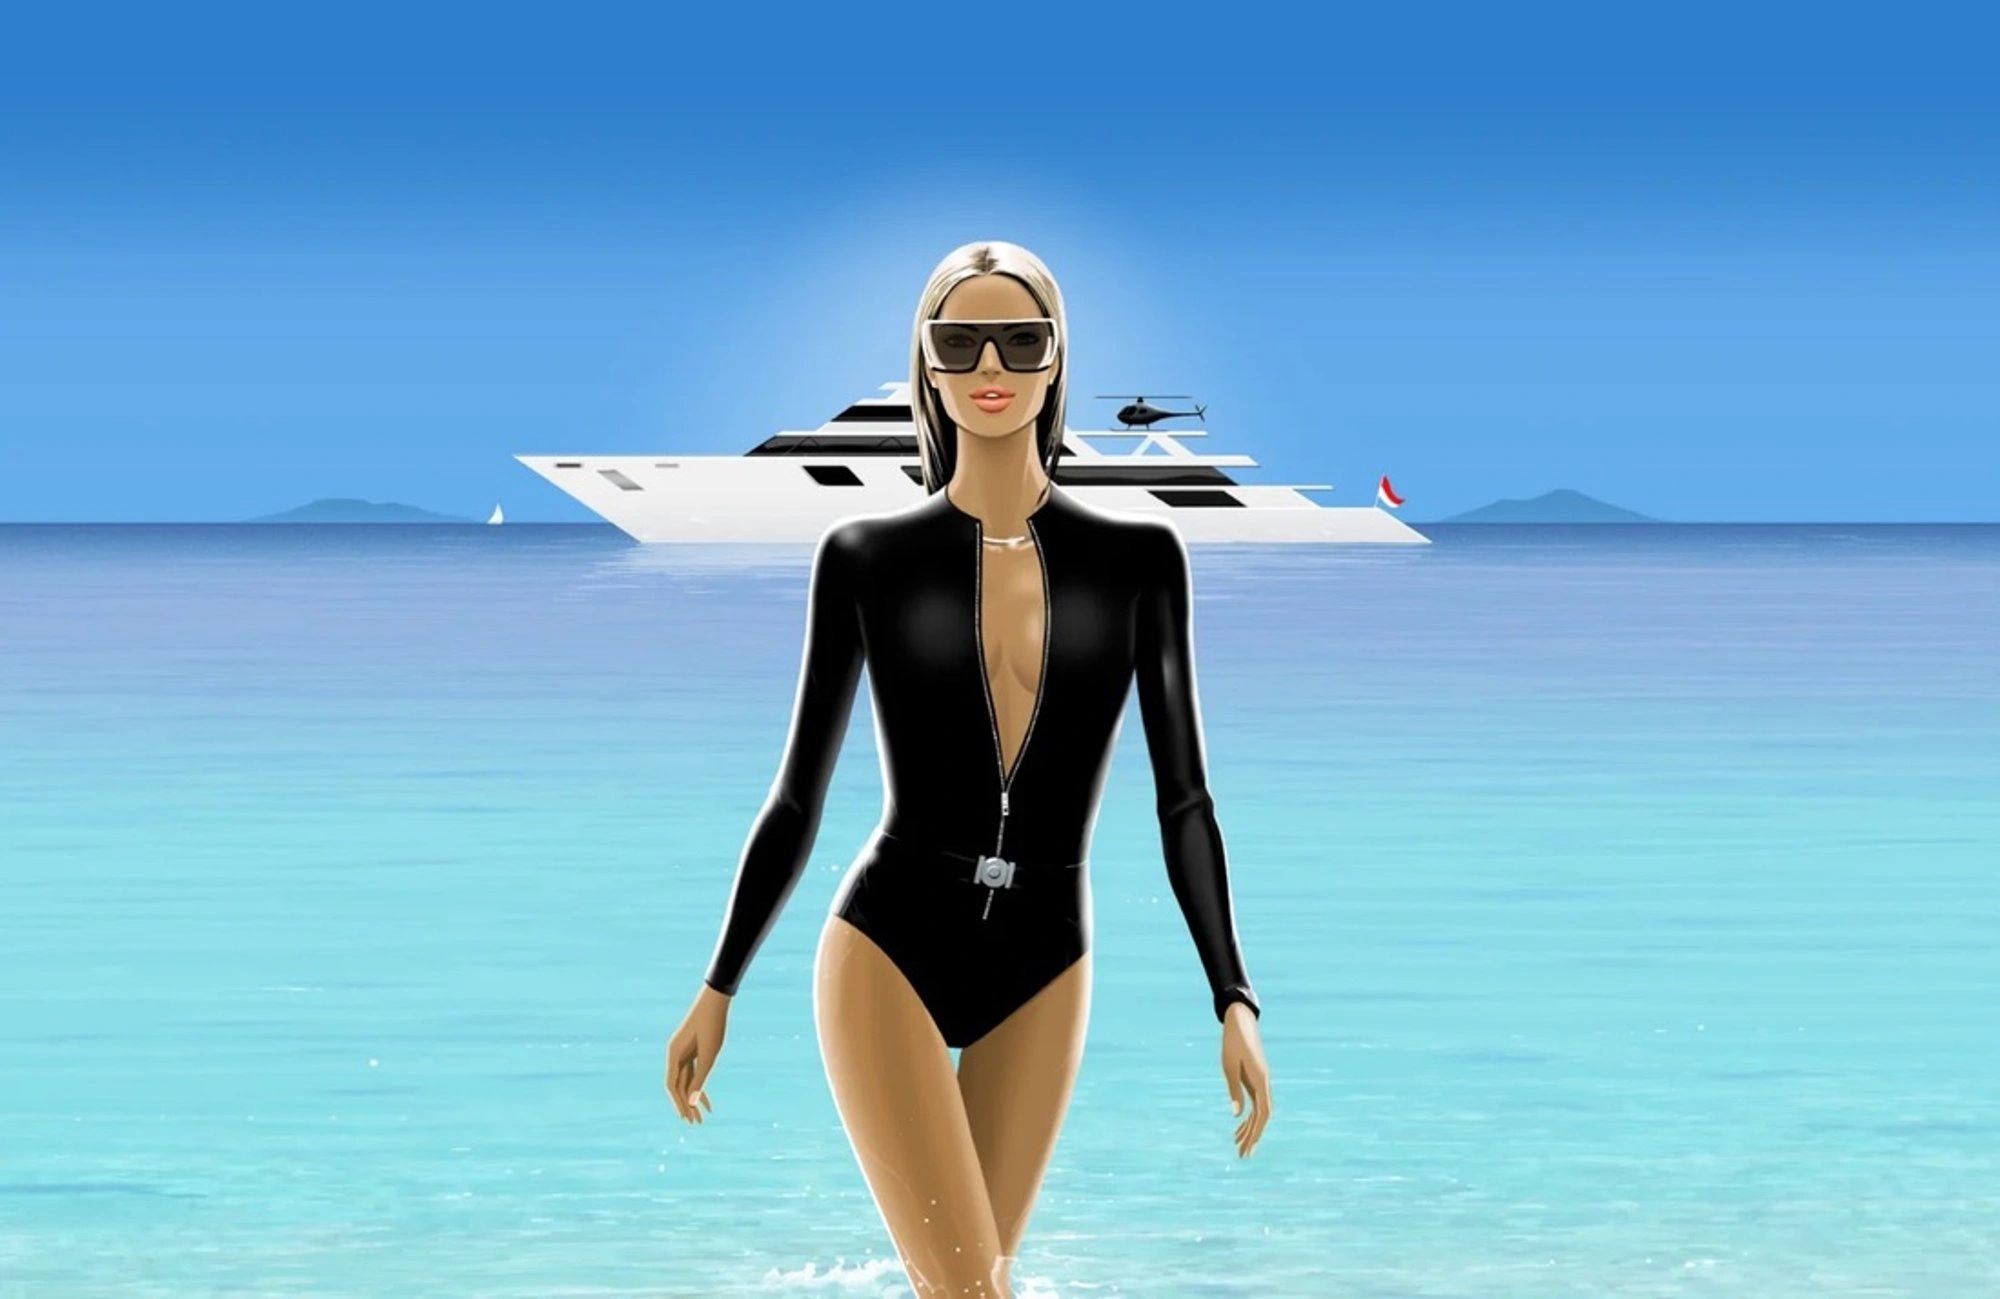 Cartoon image, woman walking on the beach and a mega yacht behind her